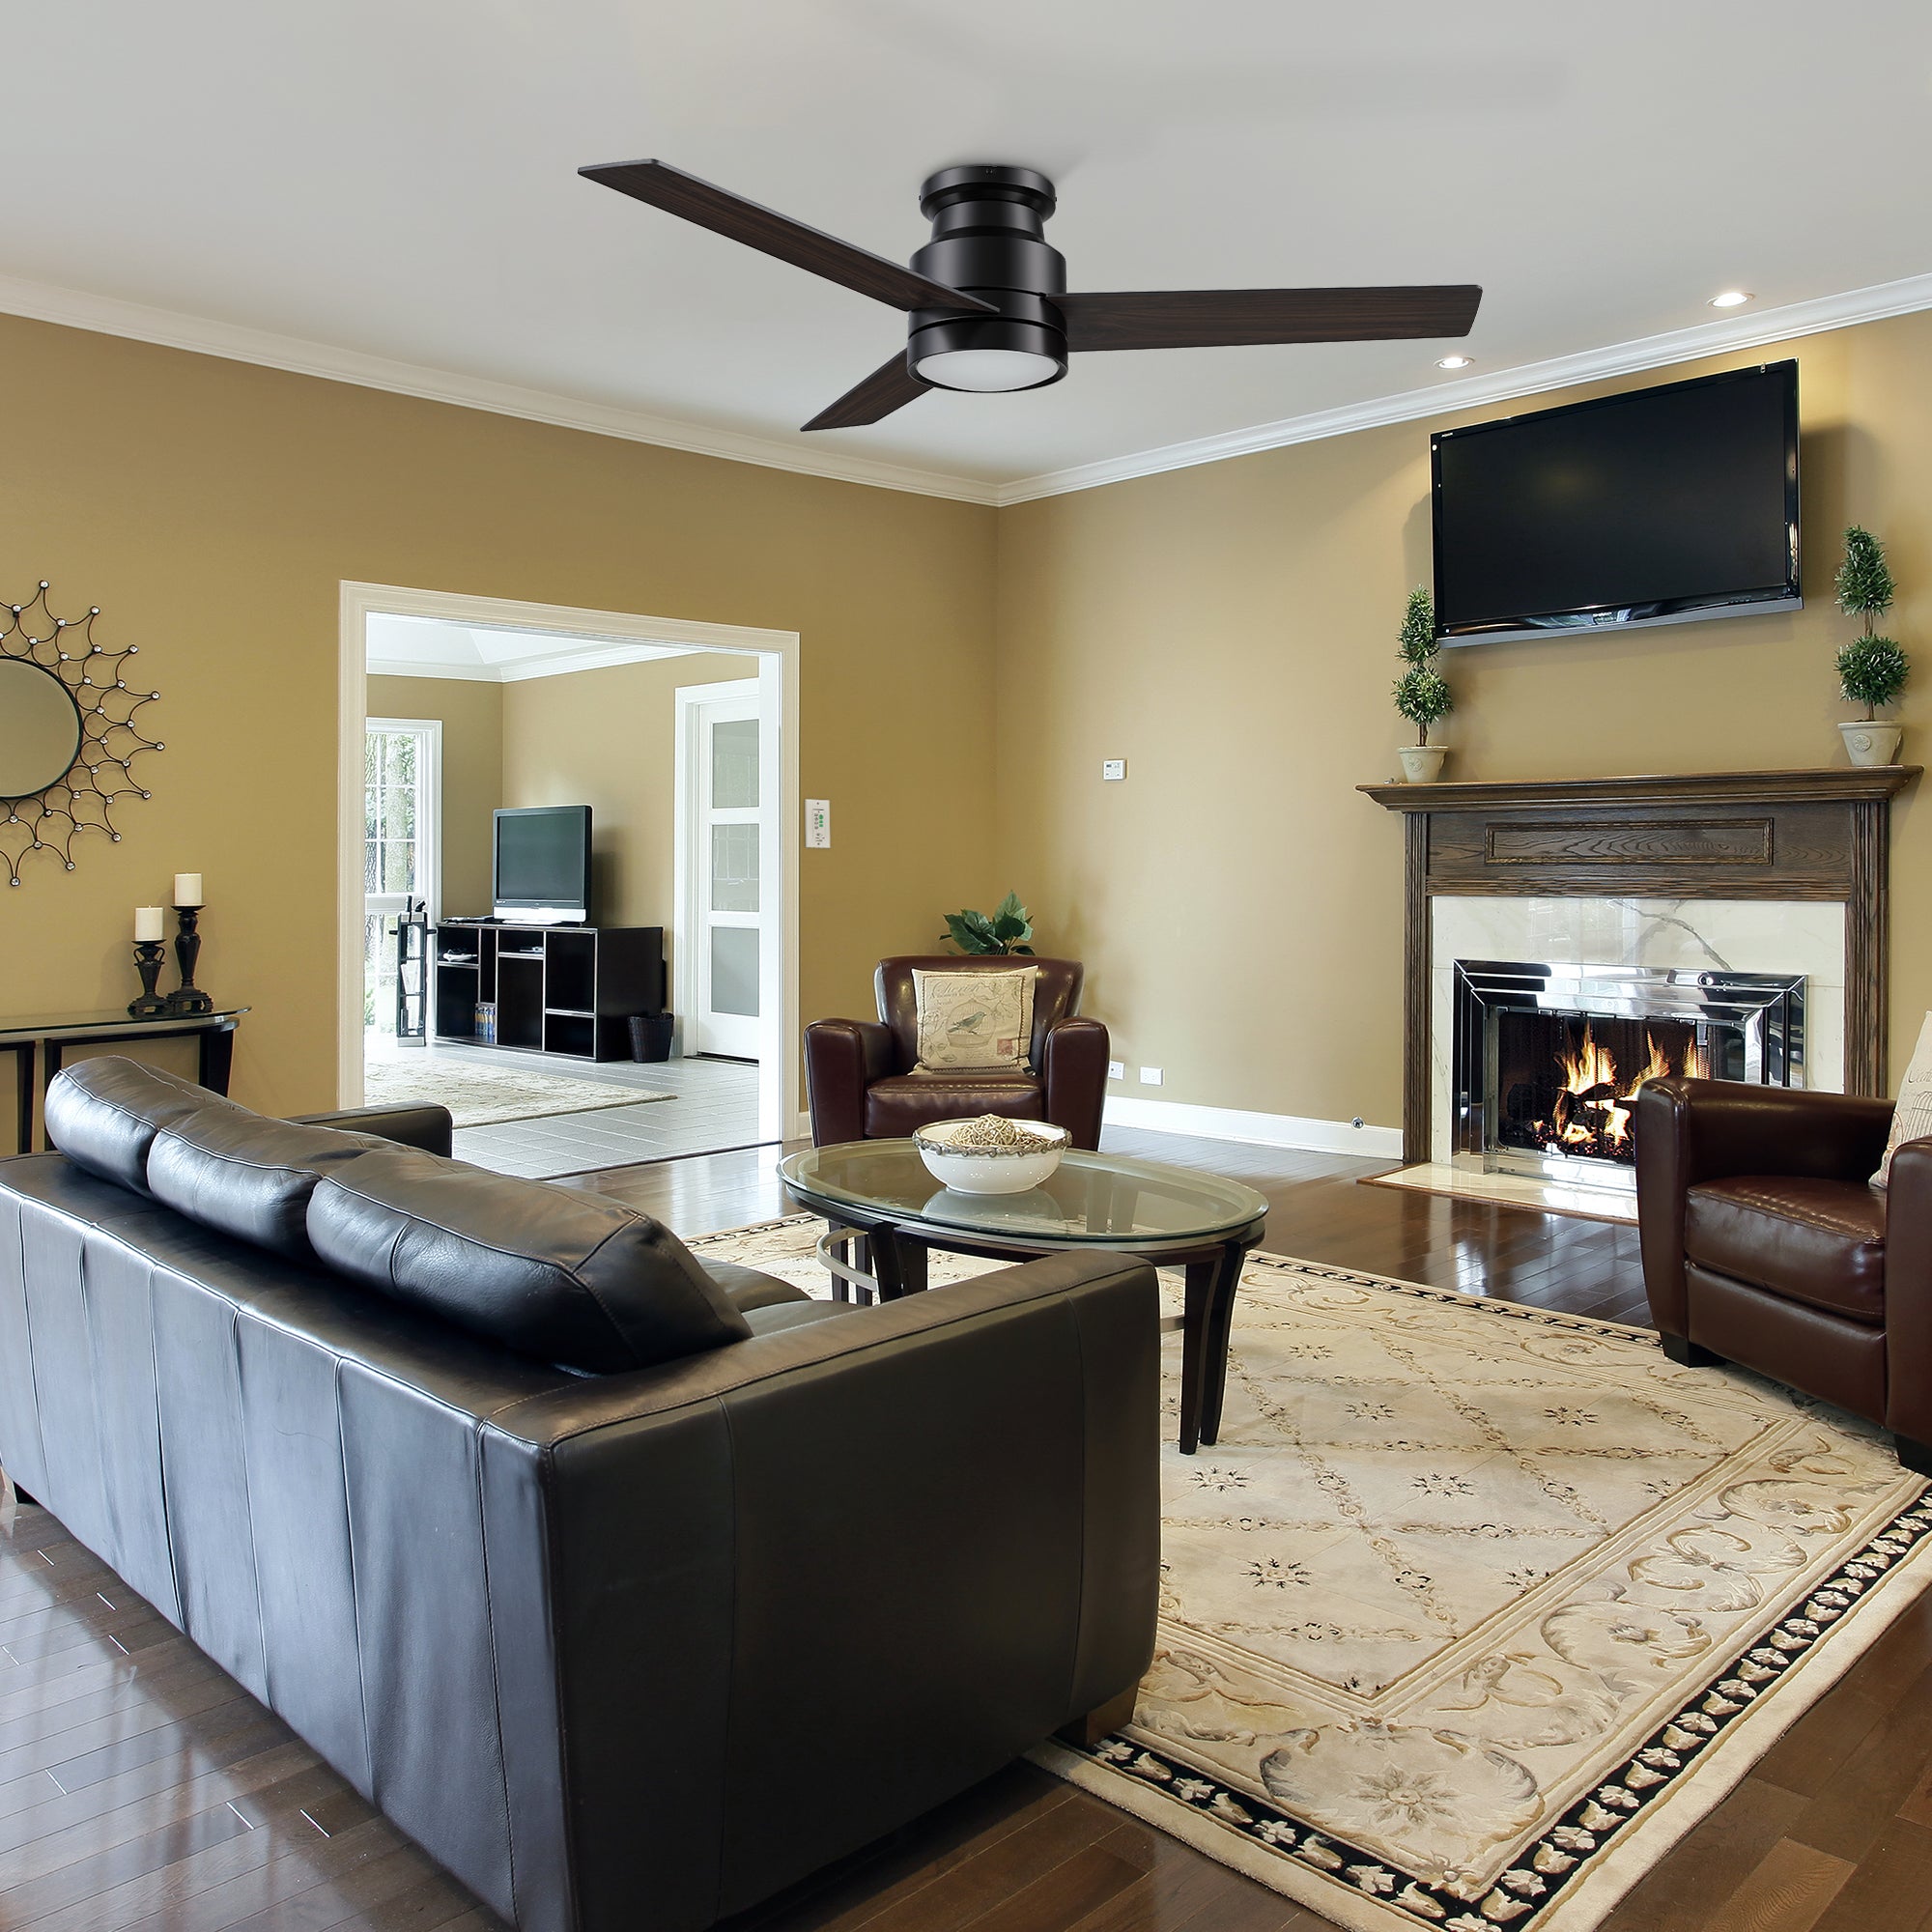 52inch low profile ceiling fan with LED light well matches to the black sofa in modern living room. 